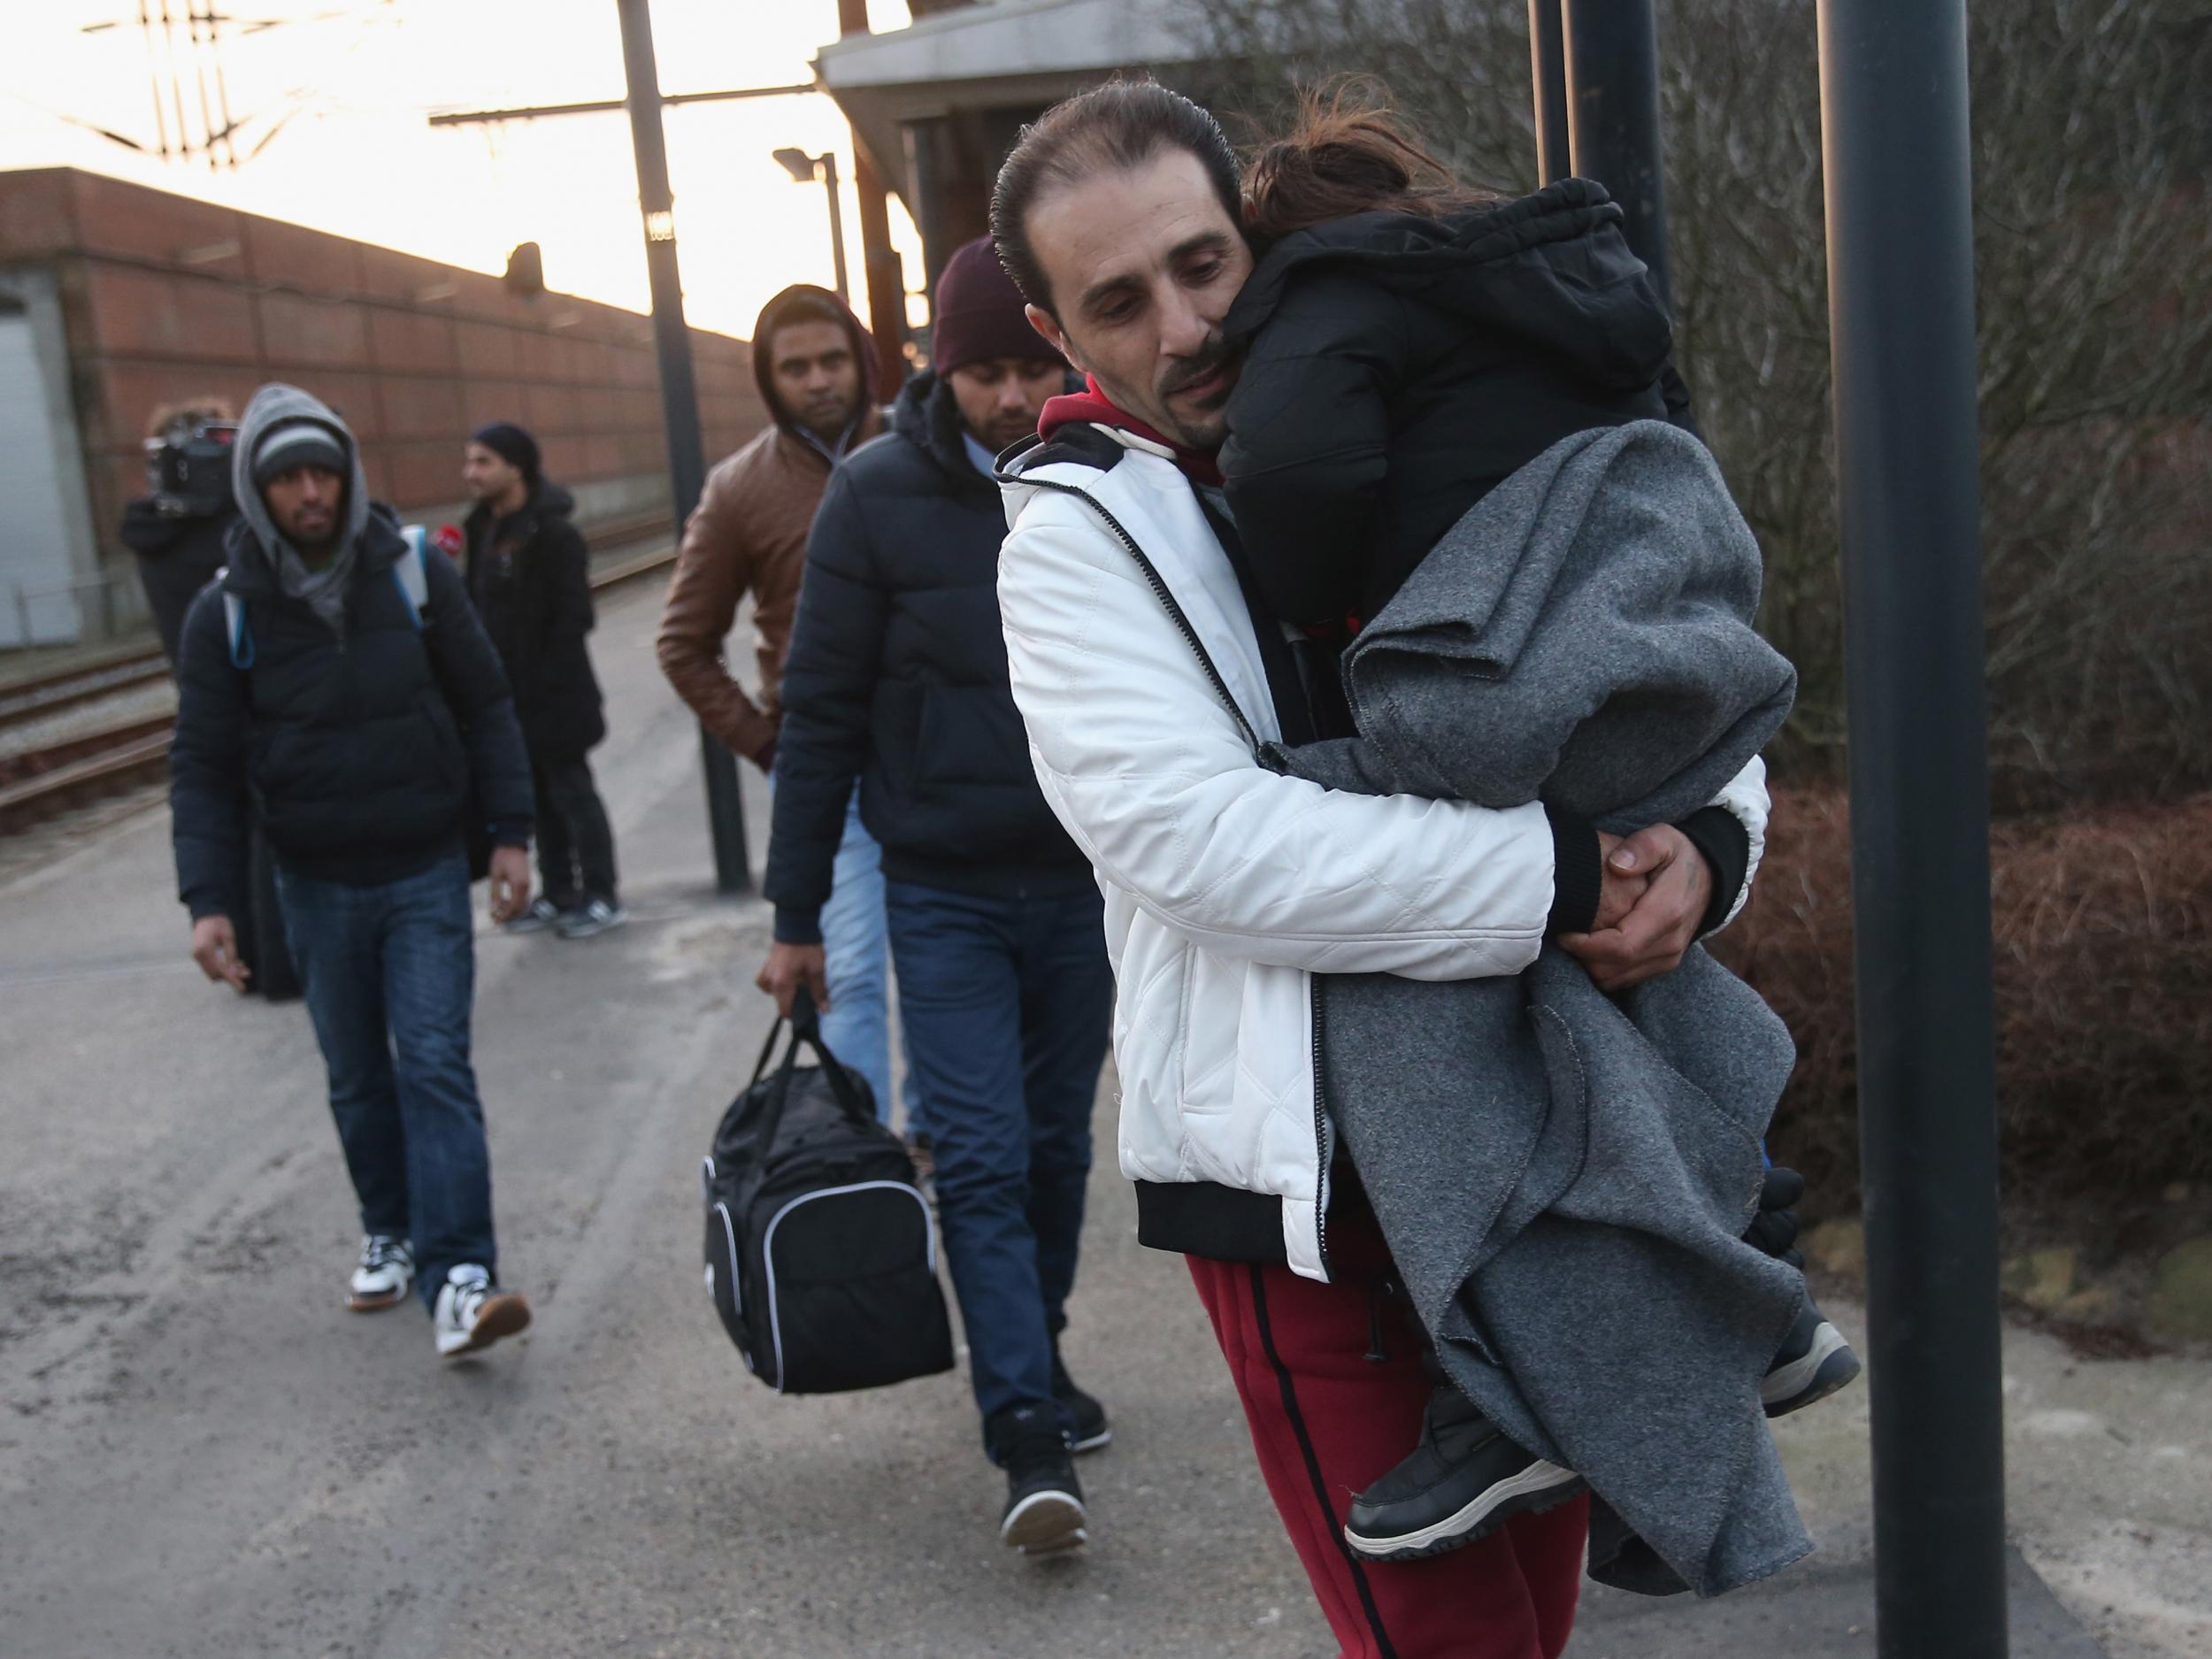 The refugee crisis has reignited debates about 'Danishness' and immigration